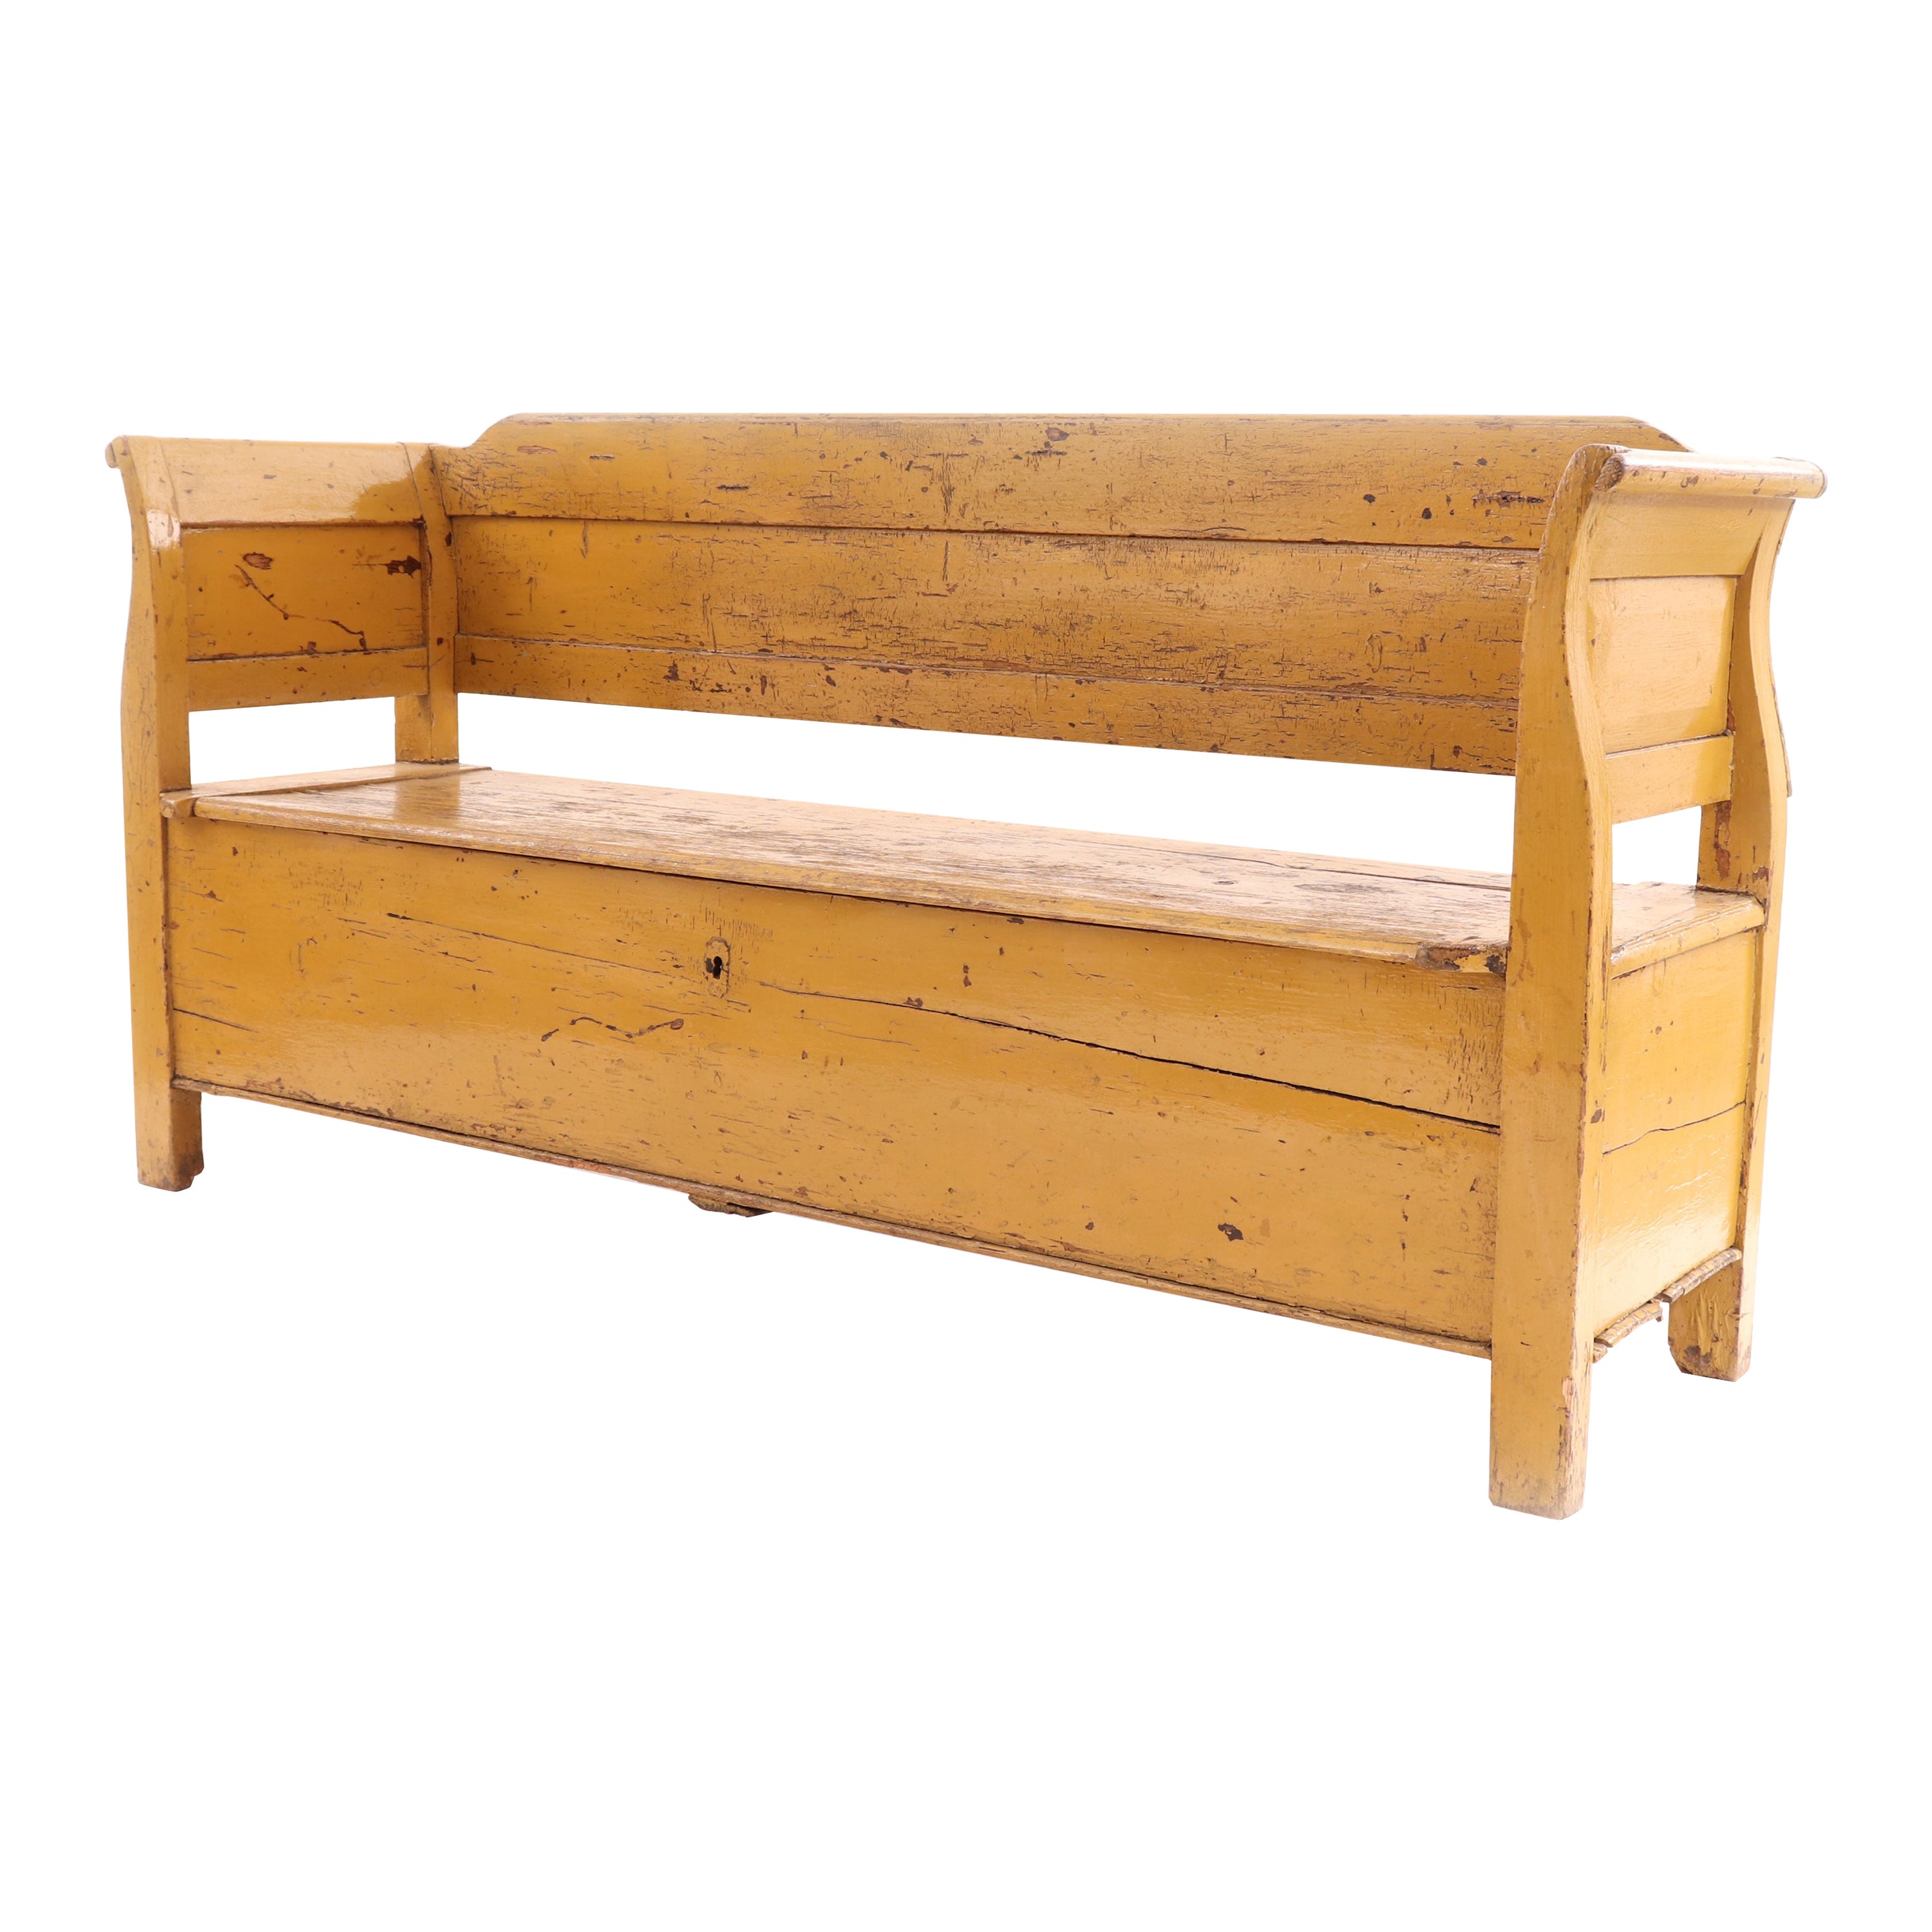 19th Century Rustic Canadian Yellow Wooden Bench